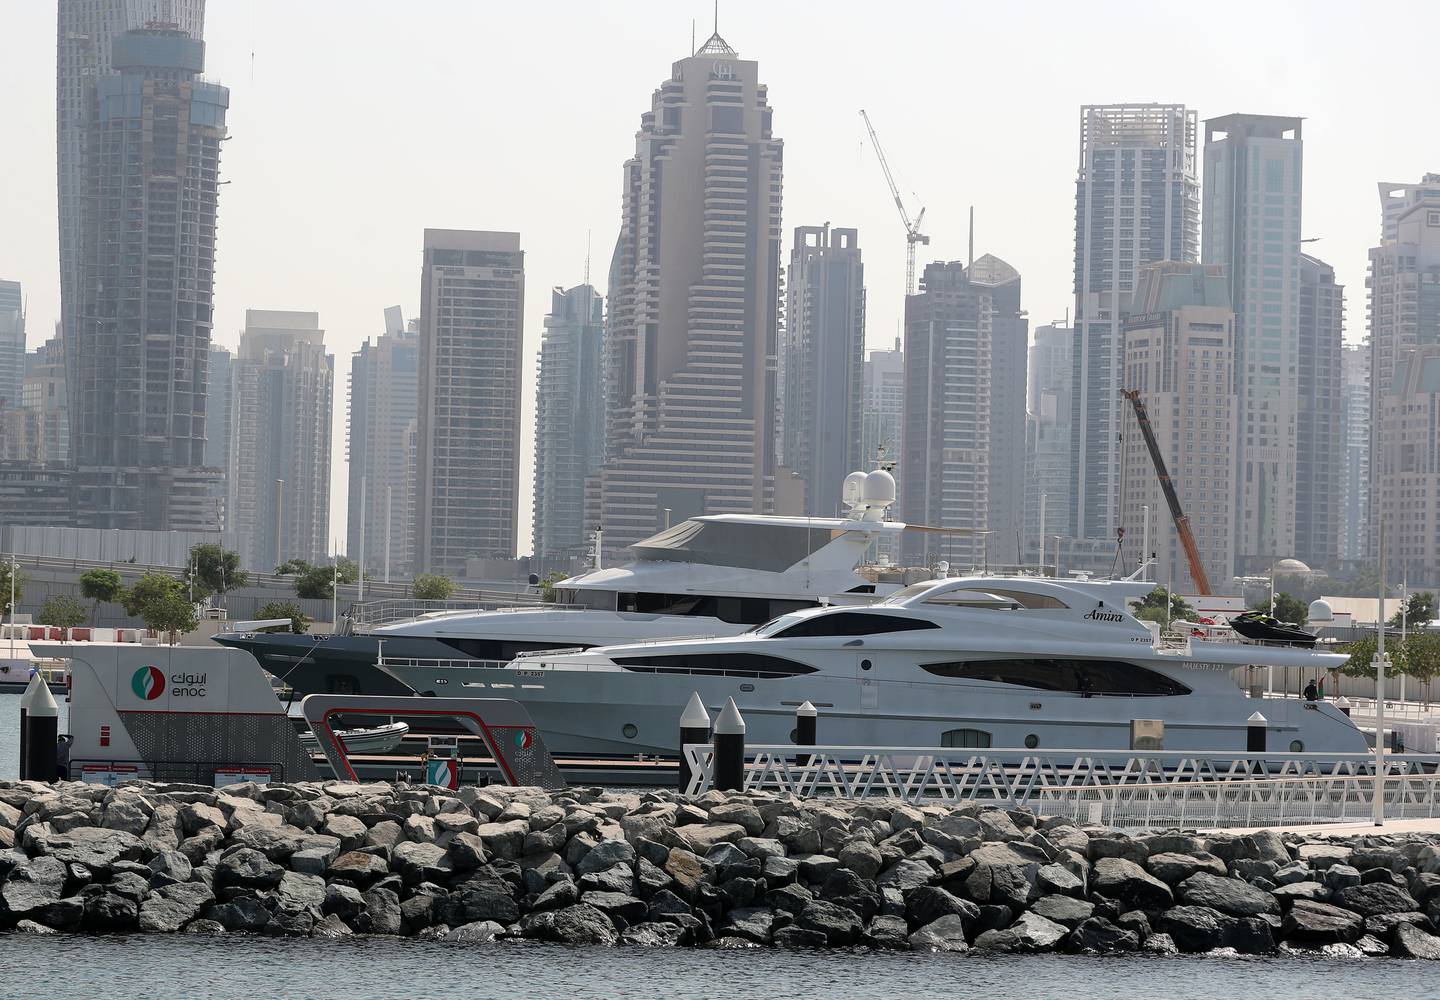 With the opening of Dubai Harbour Marina, the emirate is now home to 15 marinas with more than 3,000 berths. Chris Whiteoak / The National